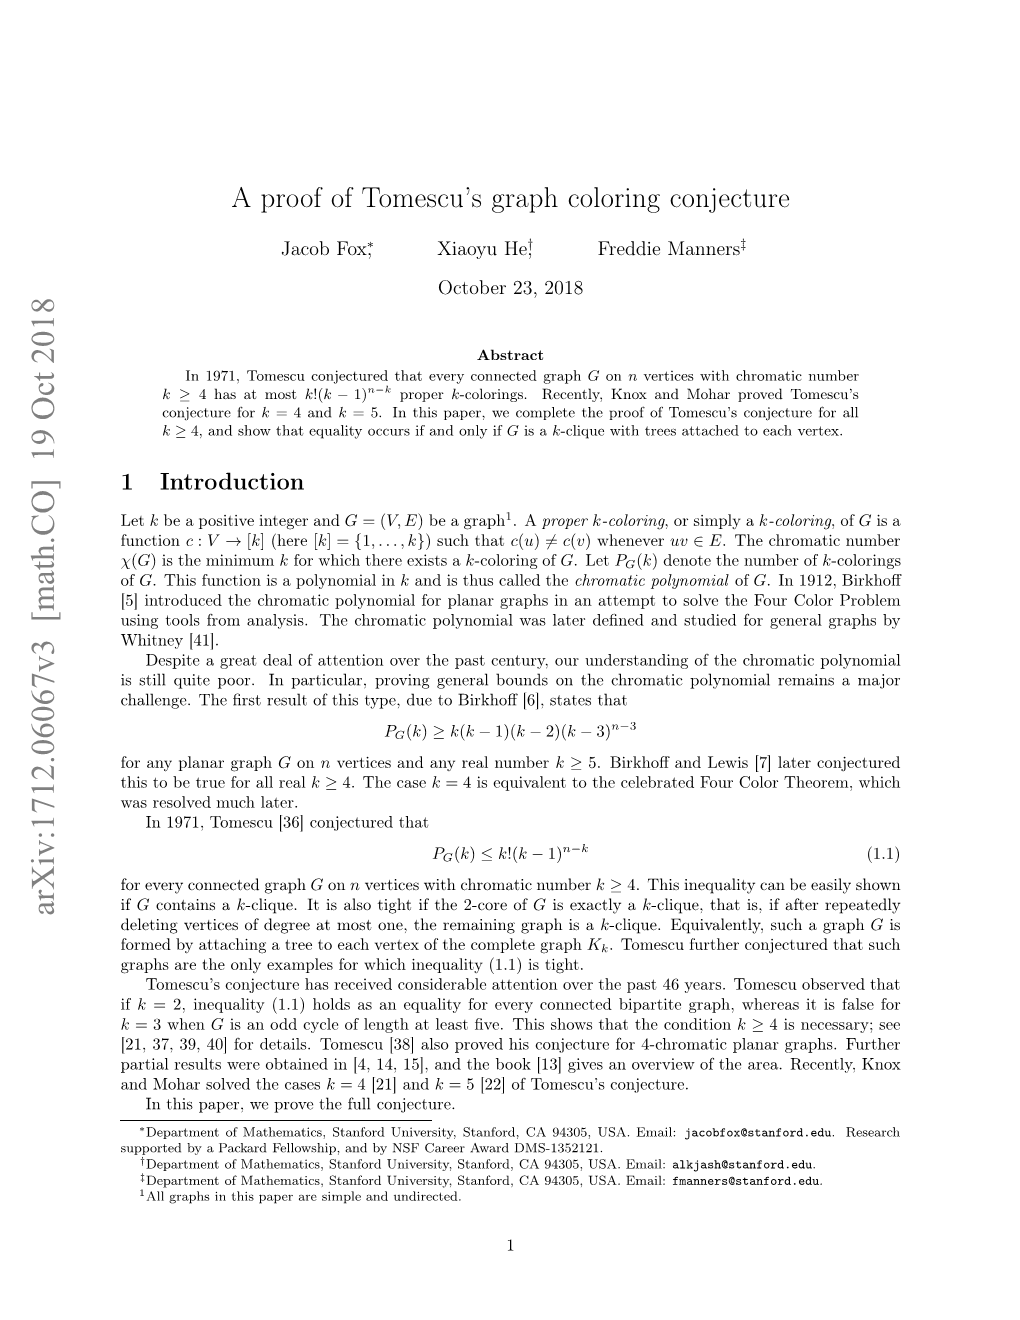 A Proof of Tomescu's Graph Coloring Conjecture